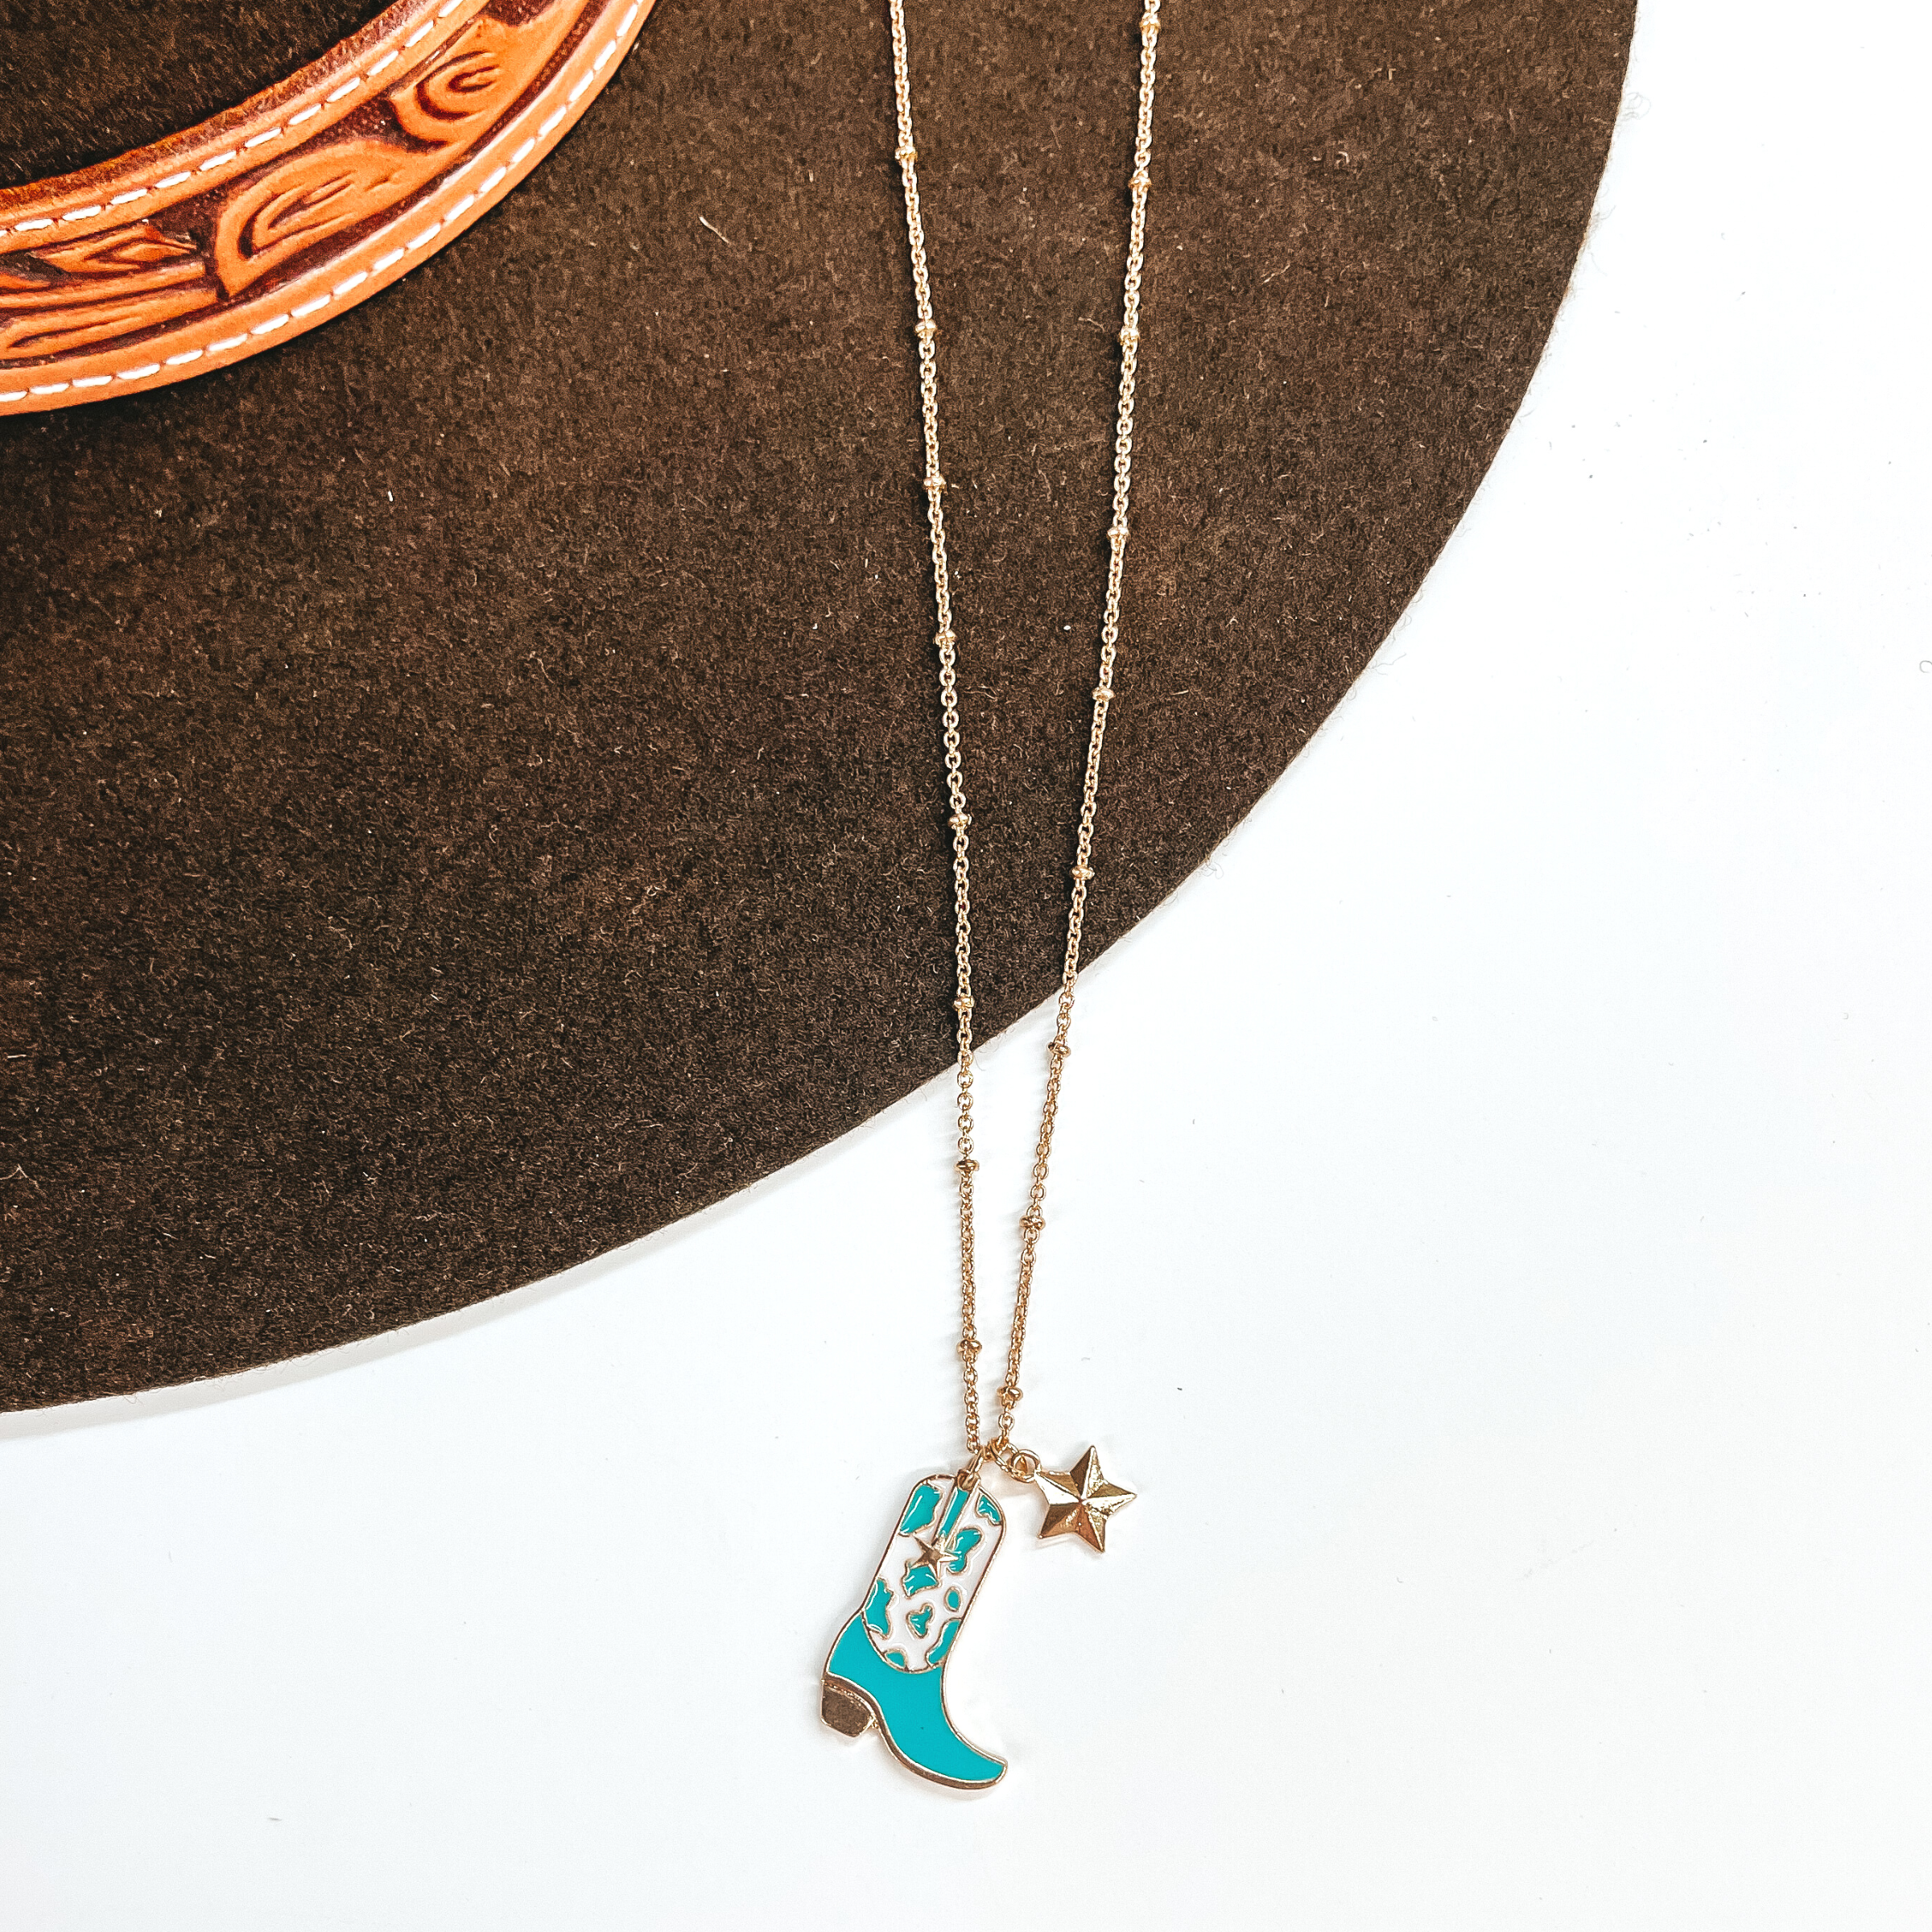 Kick Your Boots Up Gold Necklace with Cow Print Boot Pendant in White and Turquoise - Giddy Up Glamour Boutique